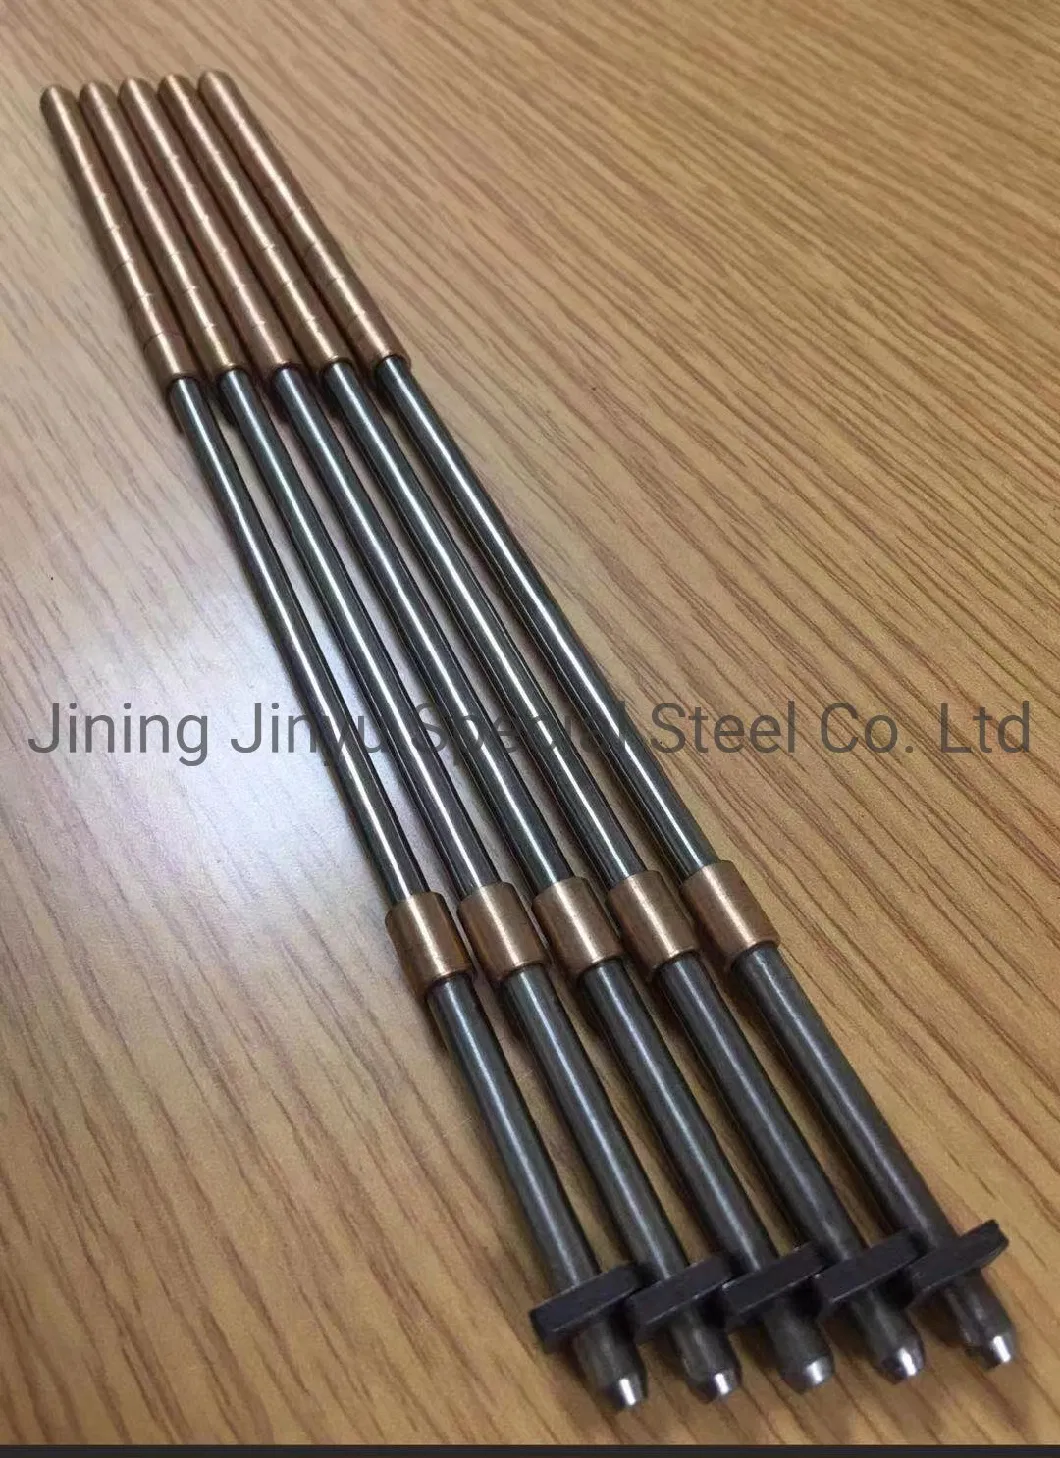 No. 1 Quality Bending Rods for Roller Rods with 19 Brass Bushings for Refiner